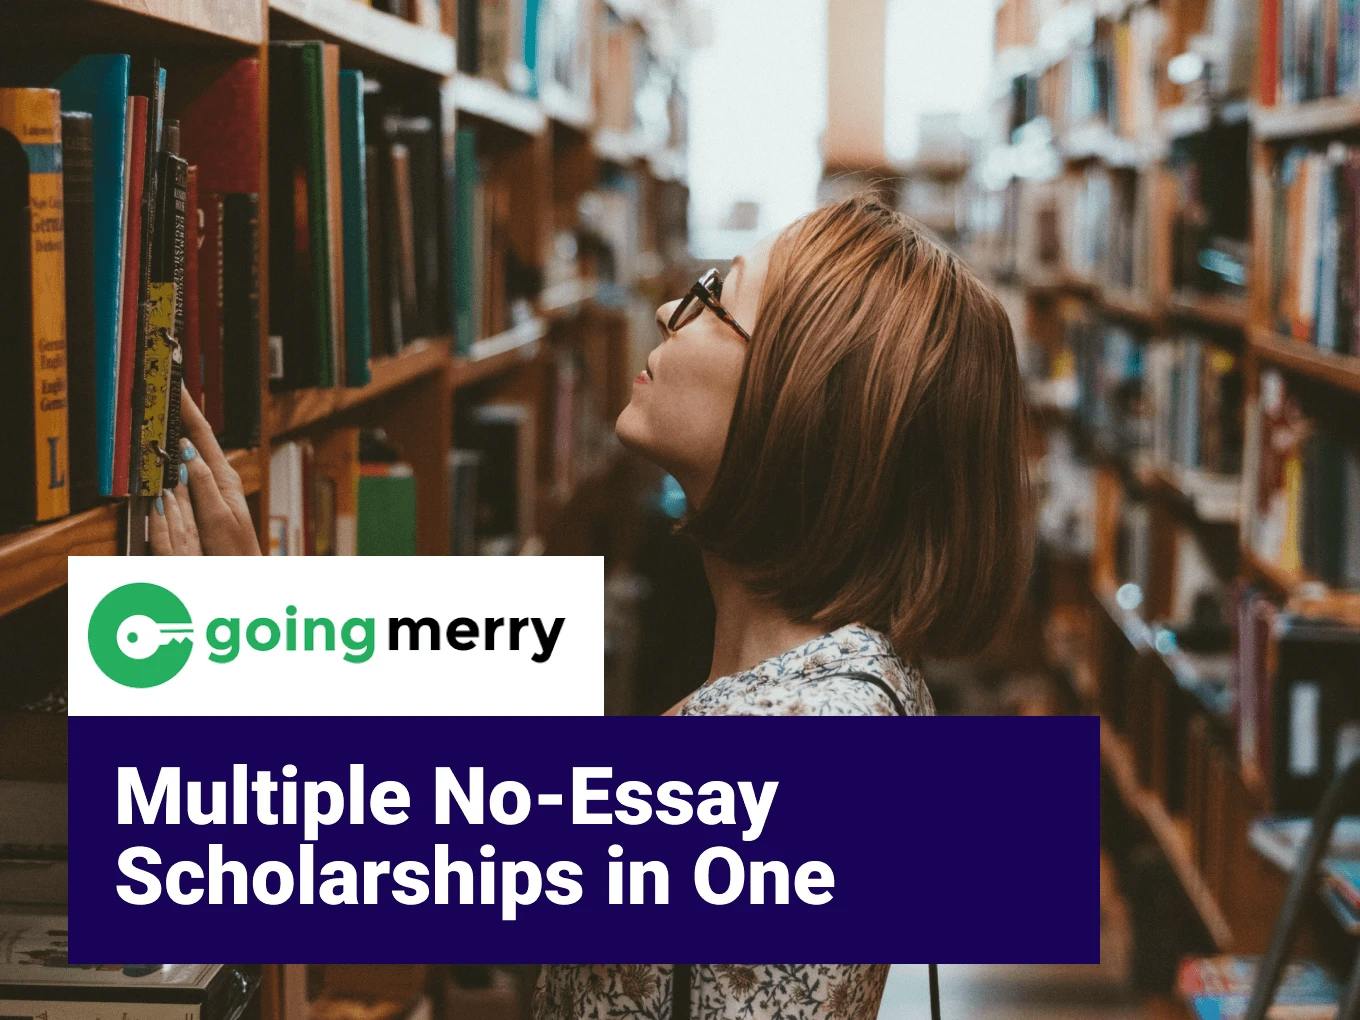 Going Merry "Multiple No-Essay Scholarships in One" Scholarship